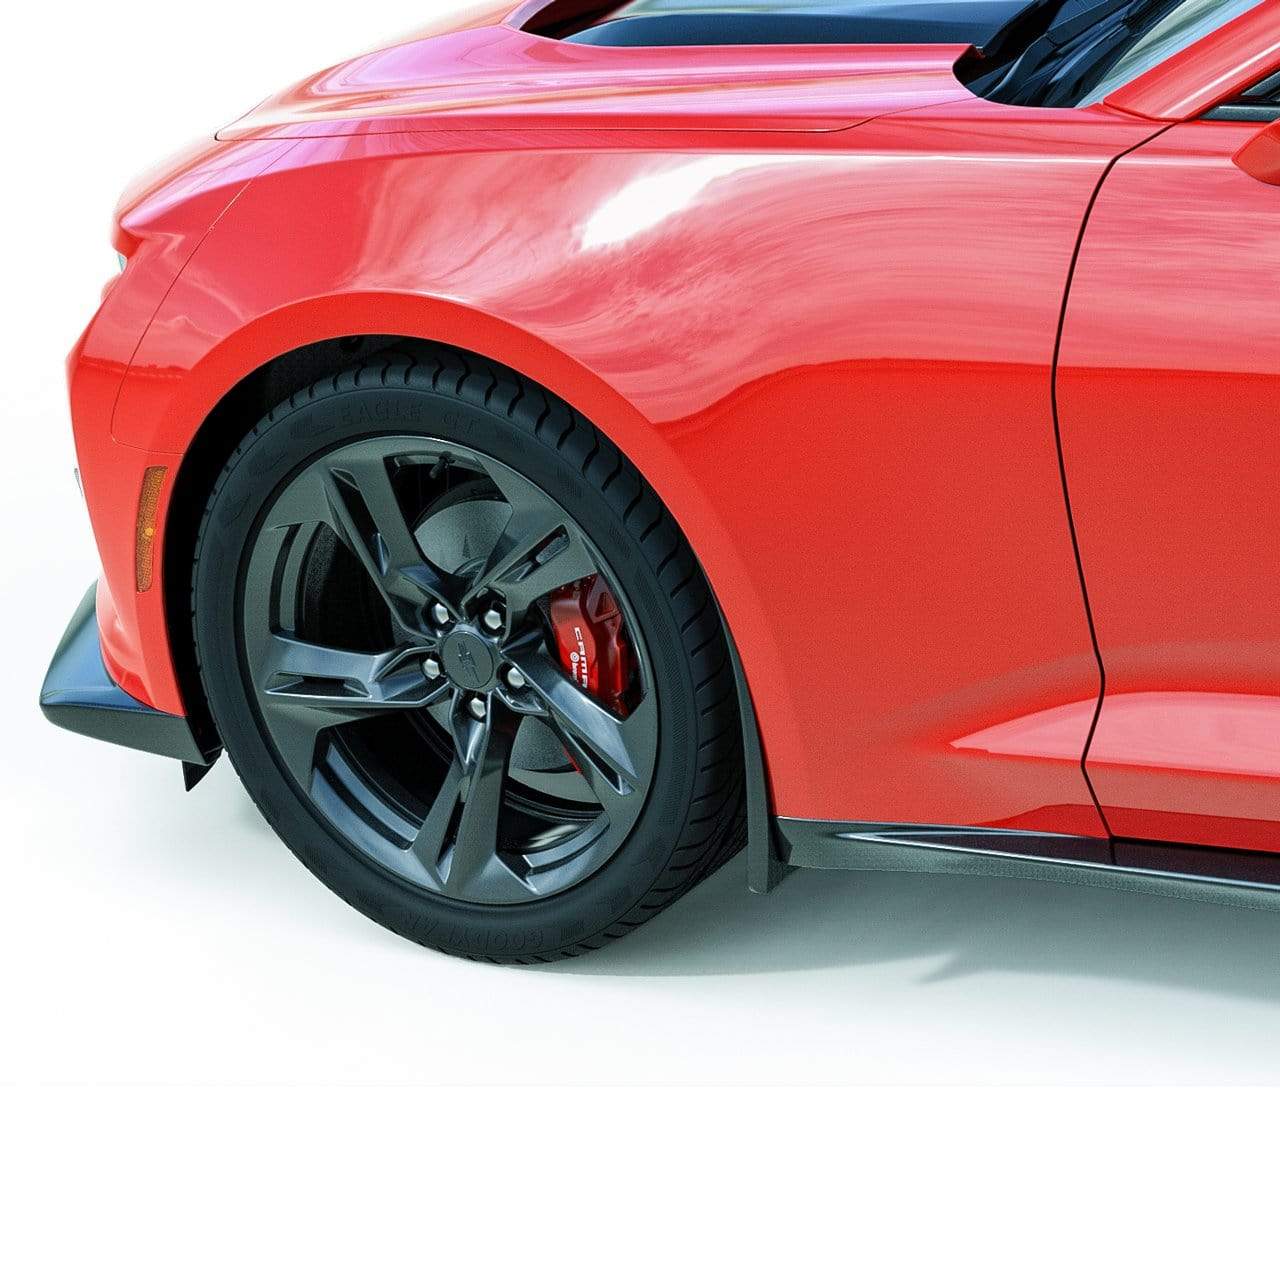 ACS Composite ZL1 Rock Chip Guards in Gloss Black for Camaro 2016+ [48-4-105]GBA - Front View.